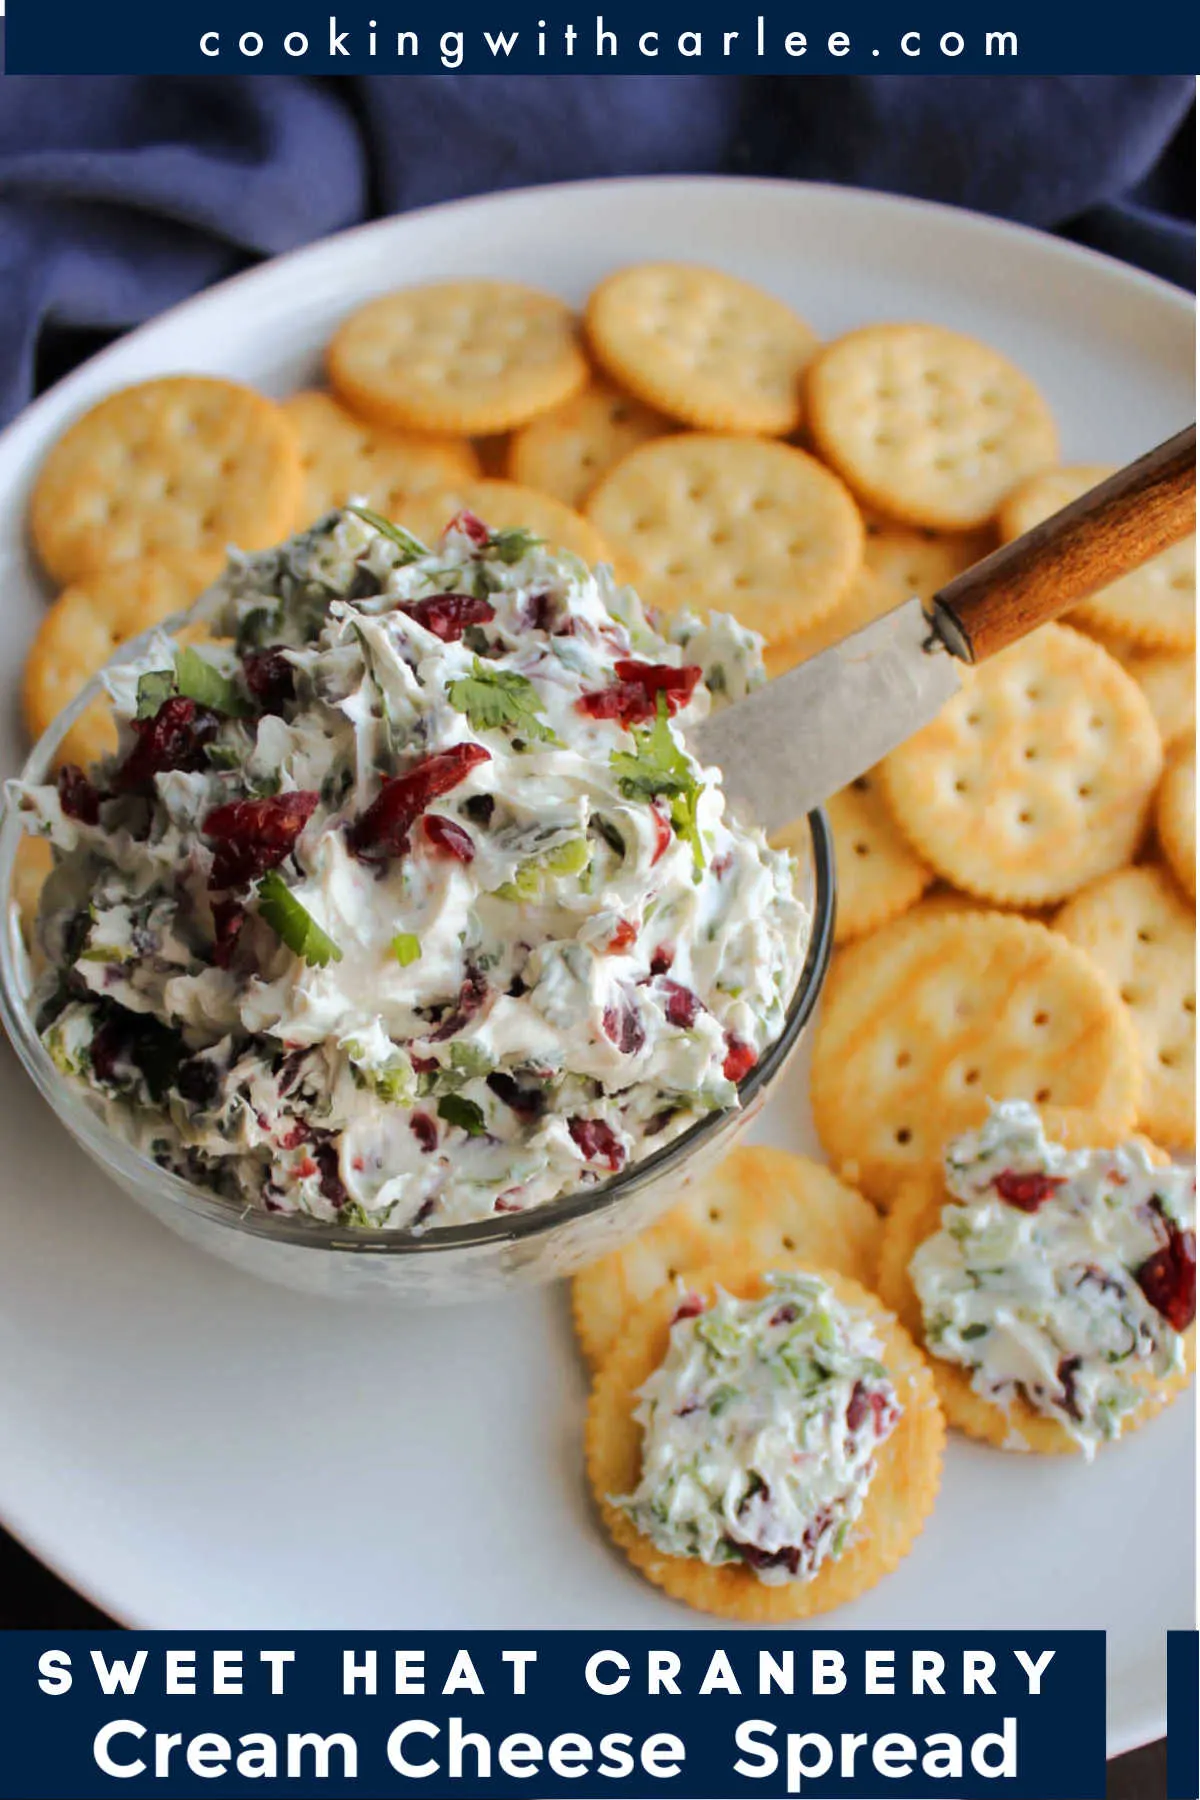 This spread is full of fresh herb flavor with a bit of spice and some sweet cranberries. The balance is delicious and it is the perfect spread for crackers.